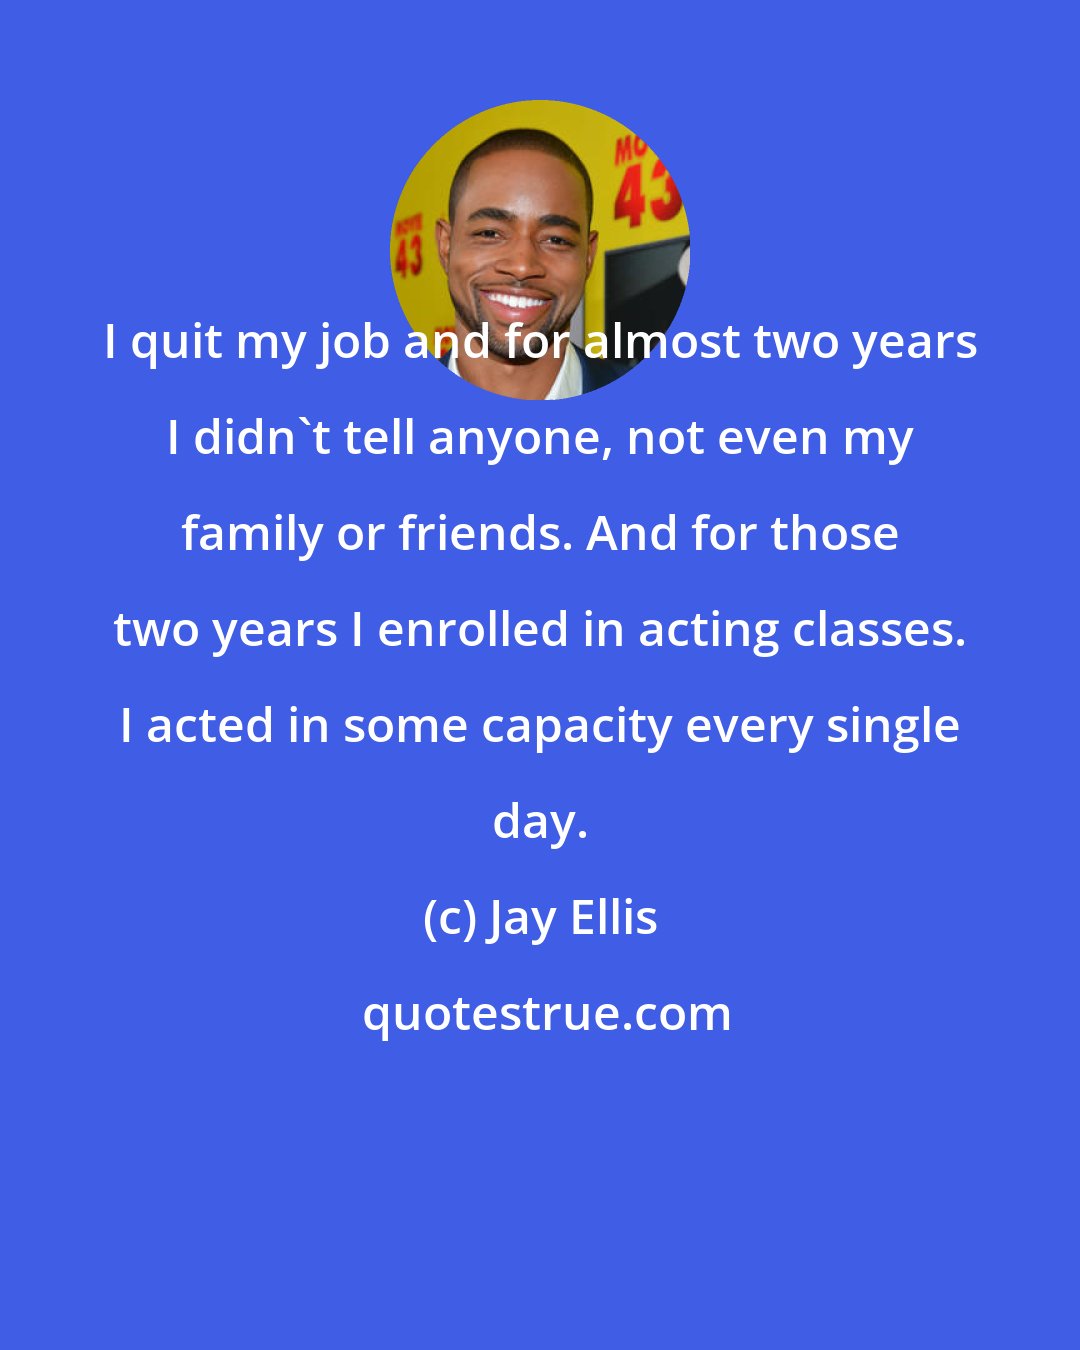 Jay Ellis: I quit my job and for almost two years I didn't tell anyone, not even my family or friends. And for those two years I enrolled in acting classes. I acted in some capacity every single day.